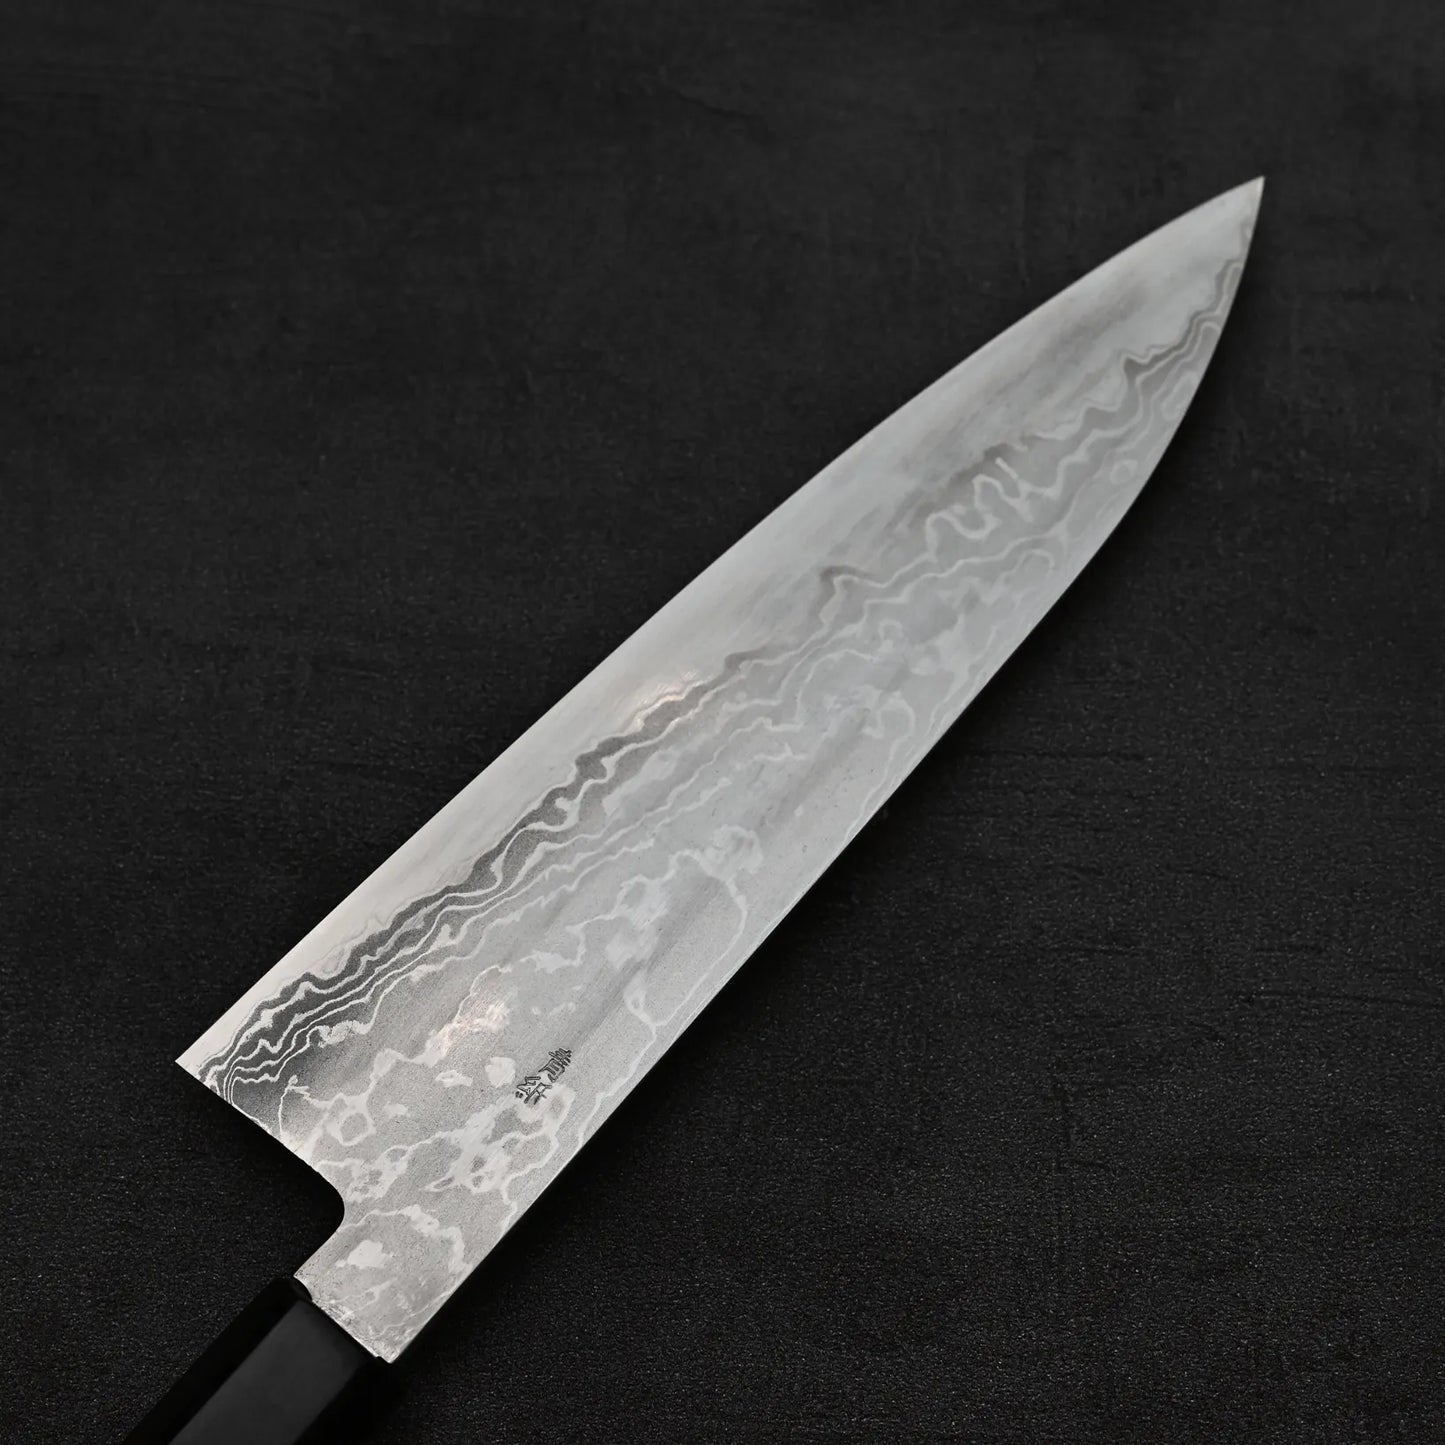 Close up view of the blade of Takayuki Iwai aogami#2 damascus 210mm gyuto knife showing the back side